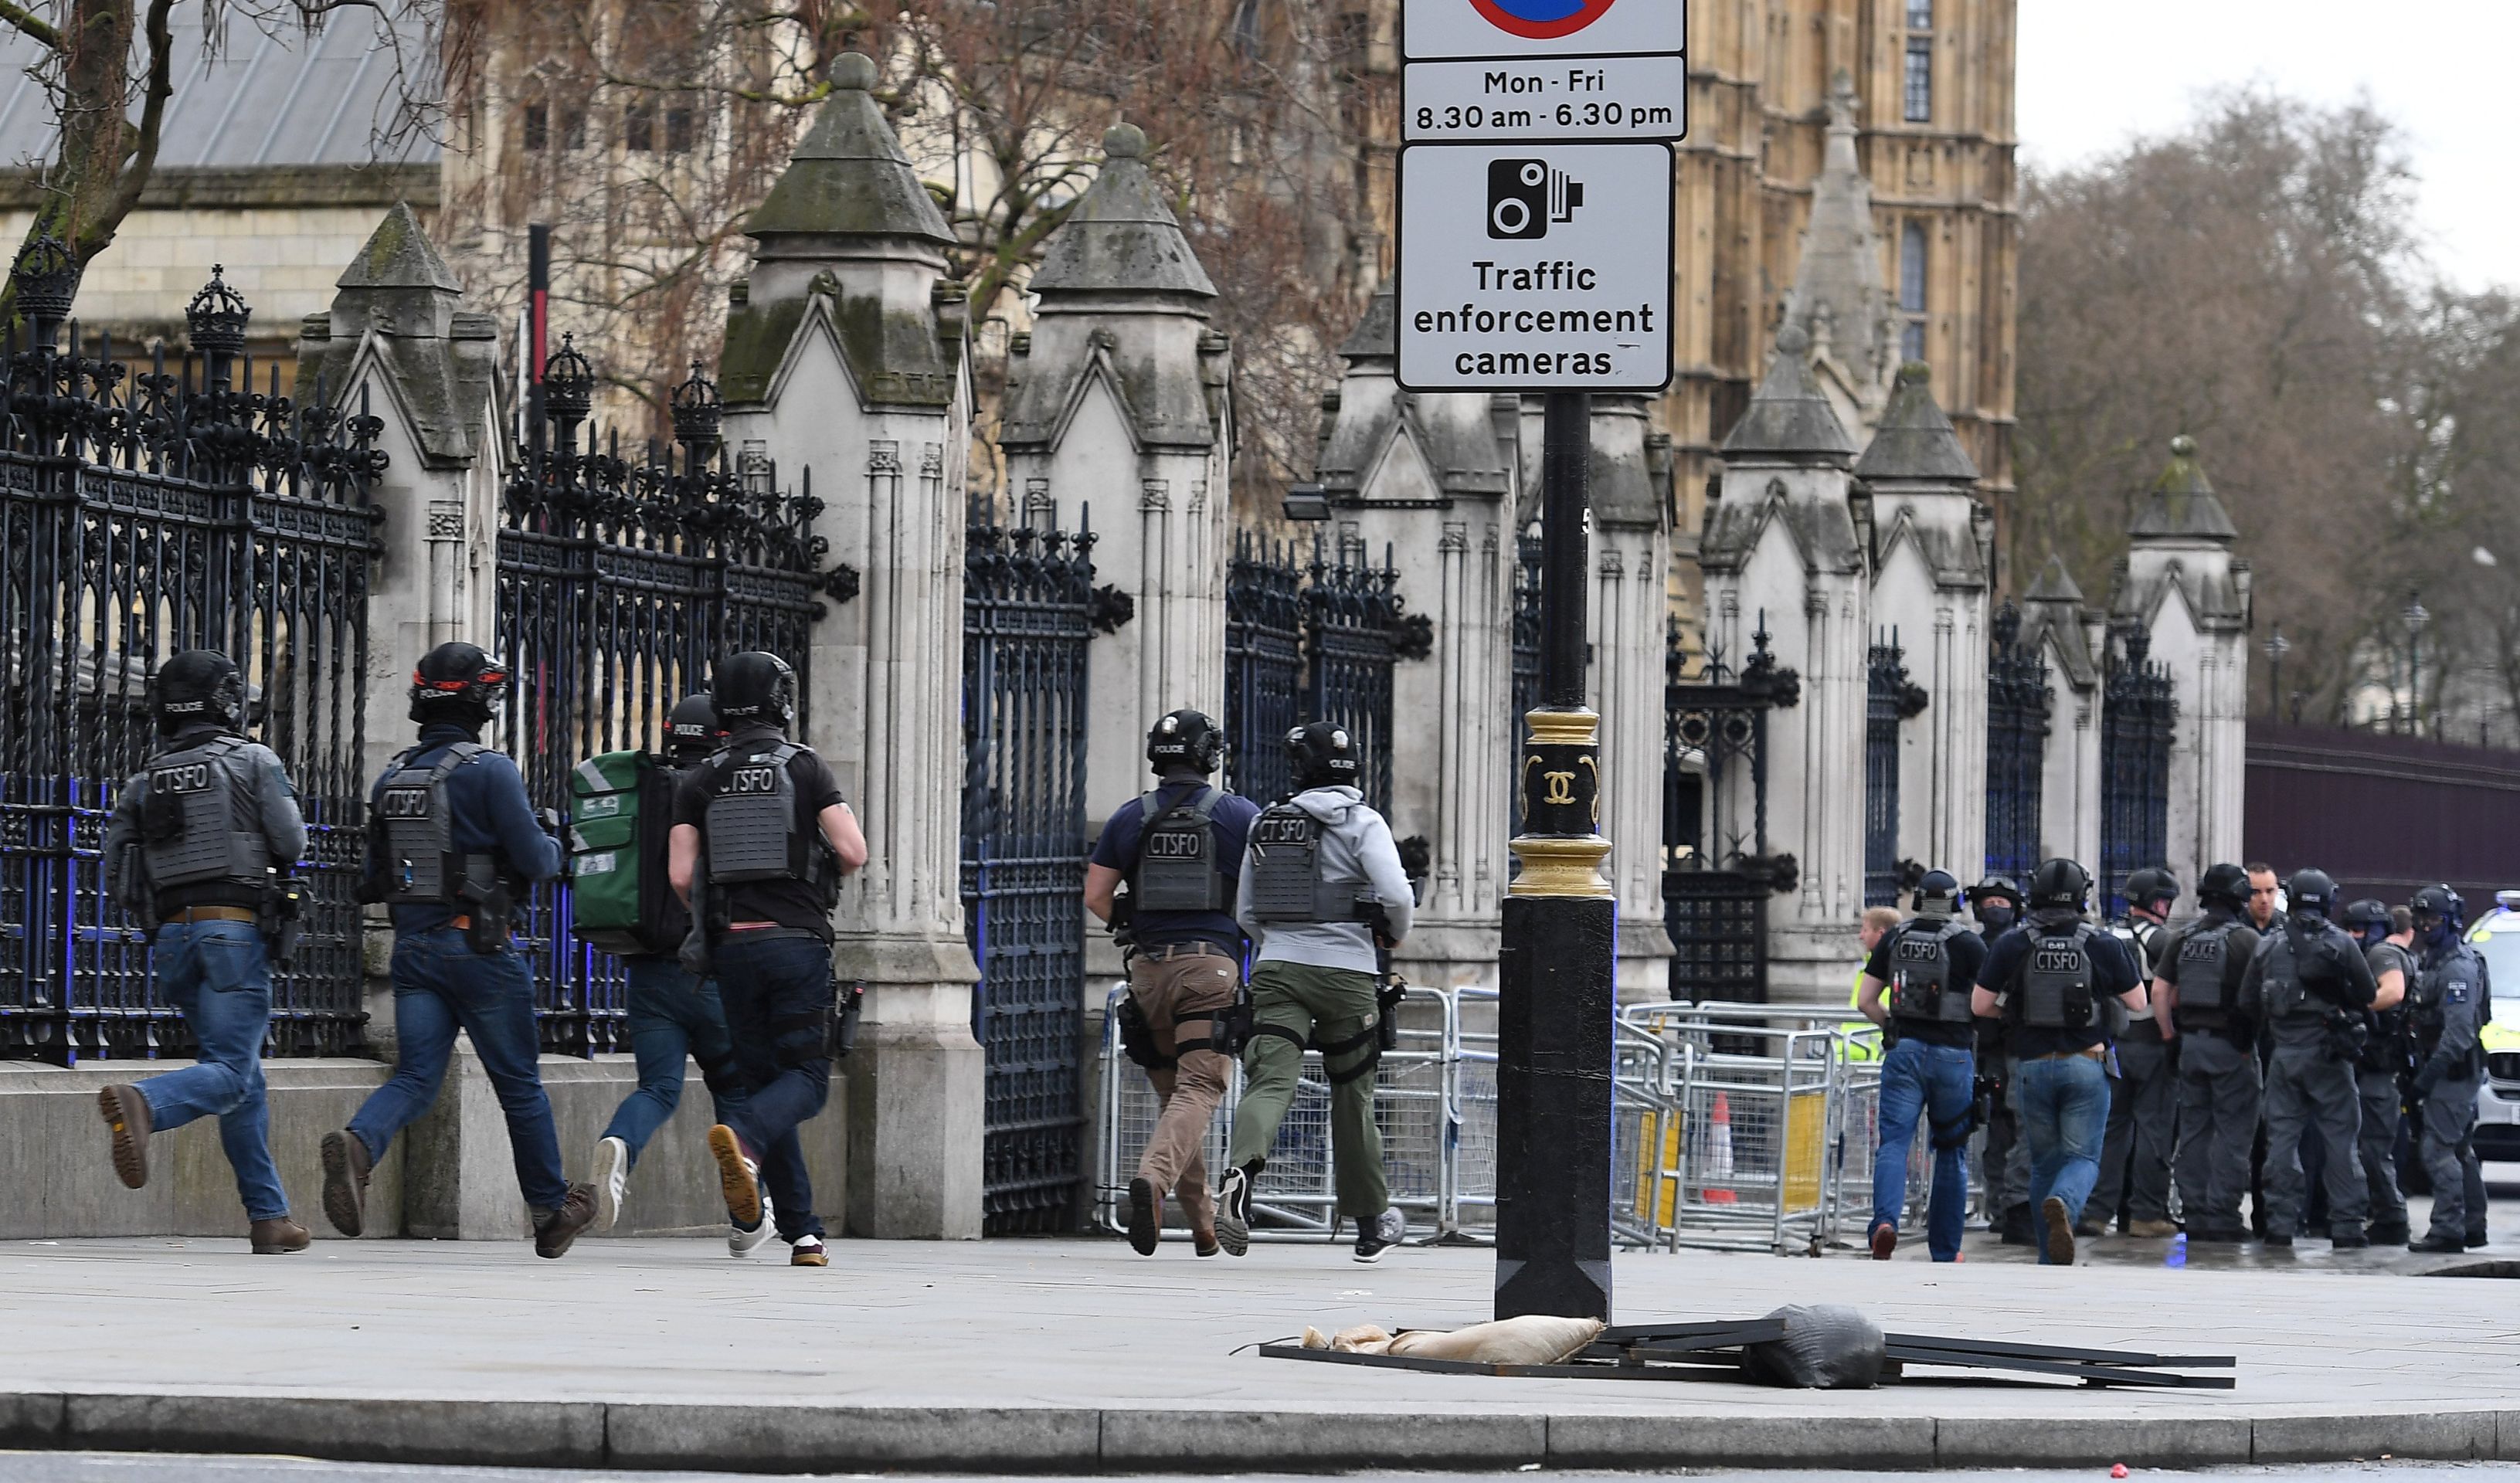 epa05863738 Armed police following major incidents outside the Houses of Parliament in central London, Britain 22 March 2017. Scotland Yard said on 22 March 21017 the police were called to a firearms incident in the Westminister palace grounds and on Westminster Bridge amid reports of several people injured in central London.  EPA/ANDY RAIN